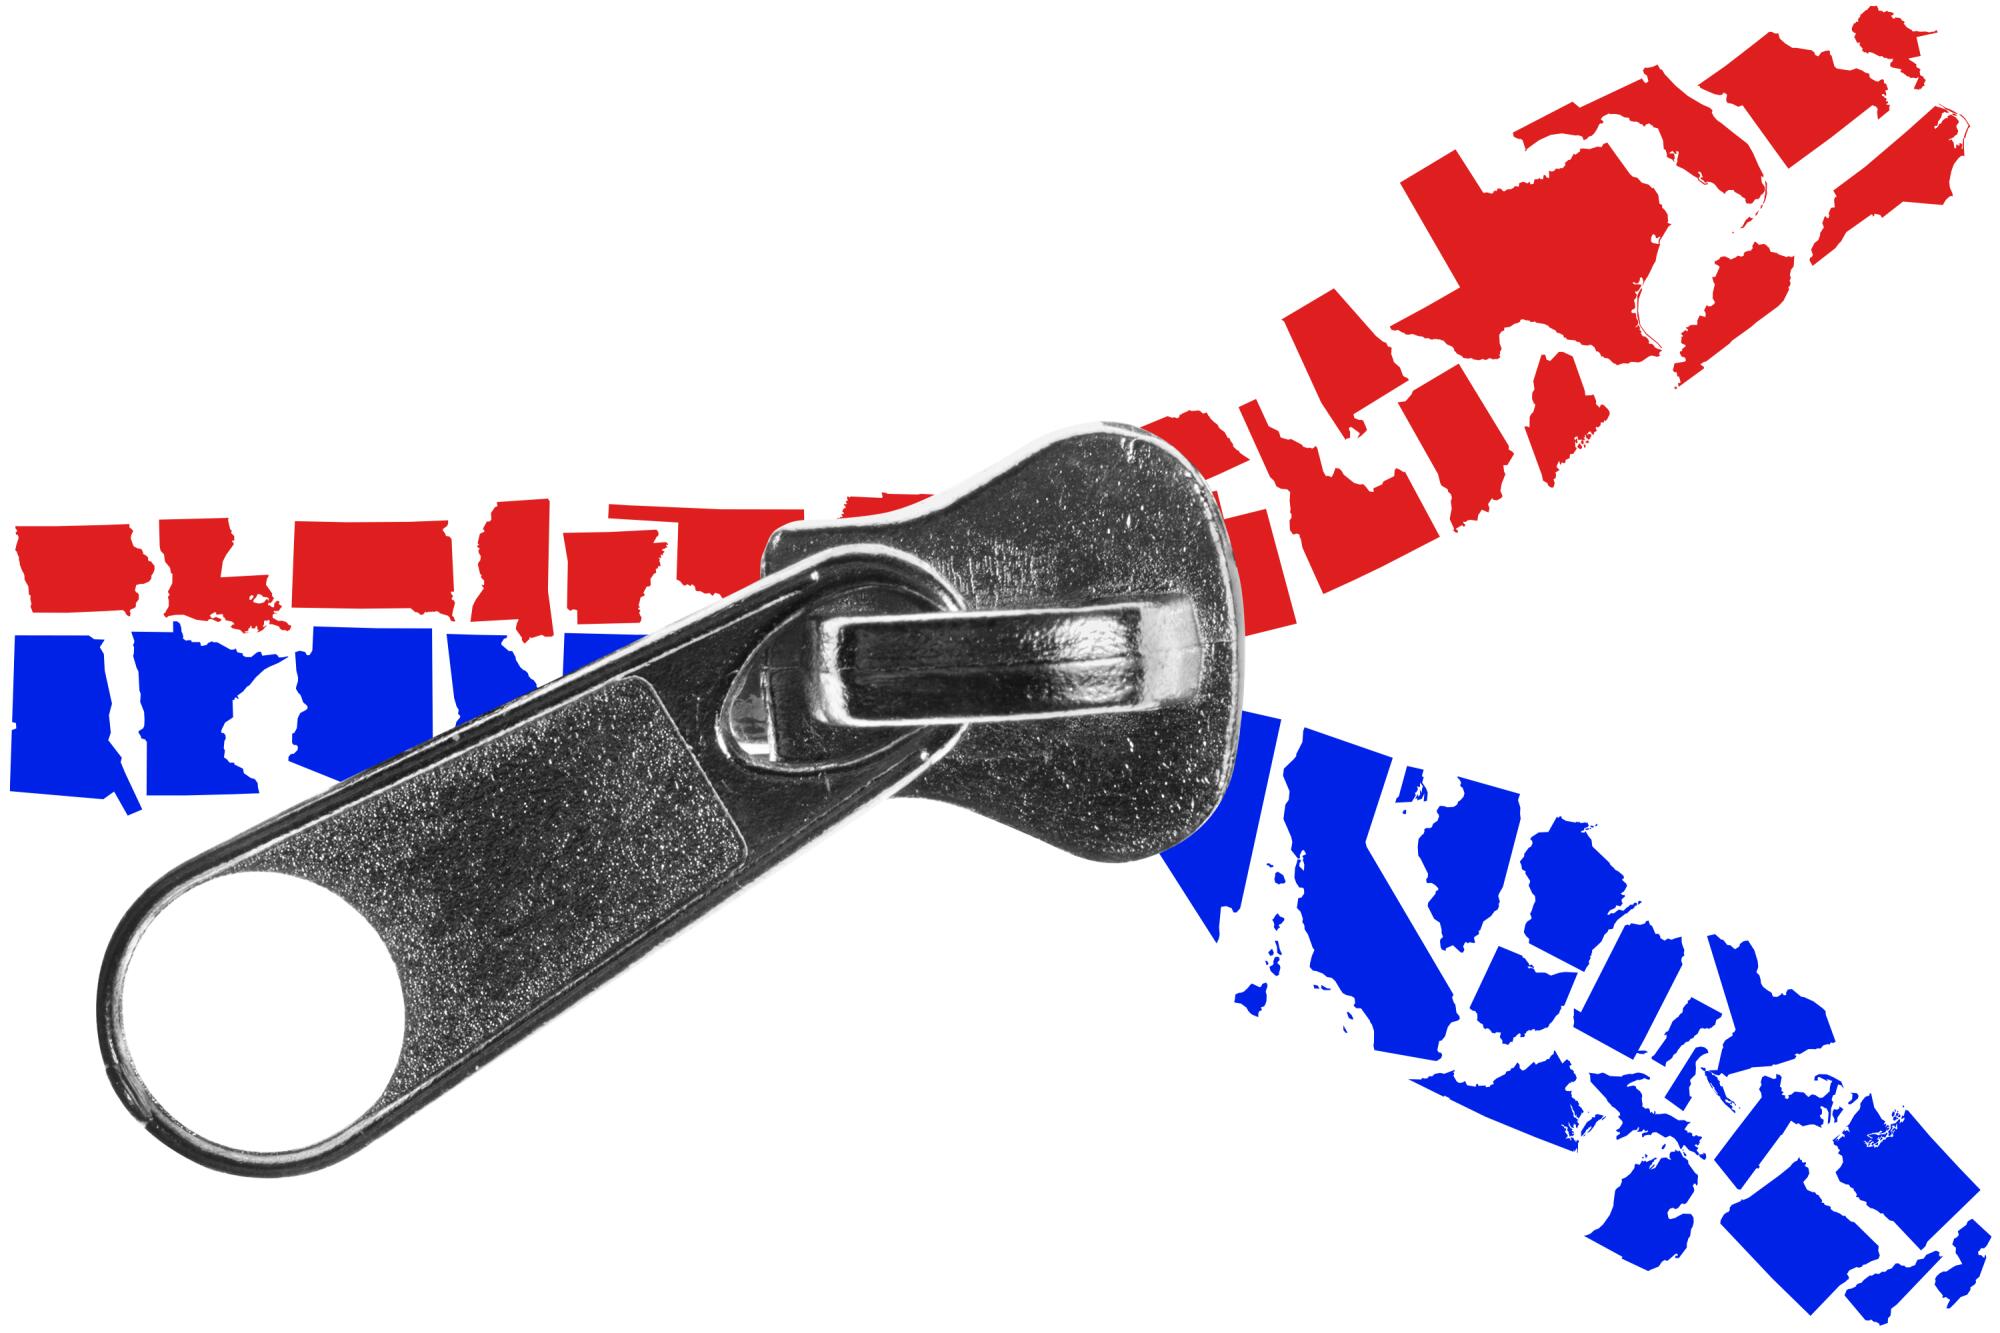 An illustration of red and blue states forming two sides of a zipper being unzipped